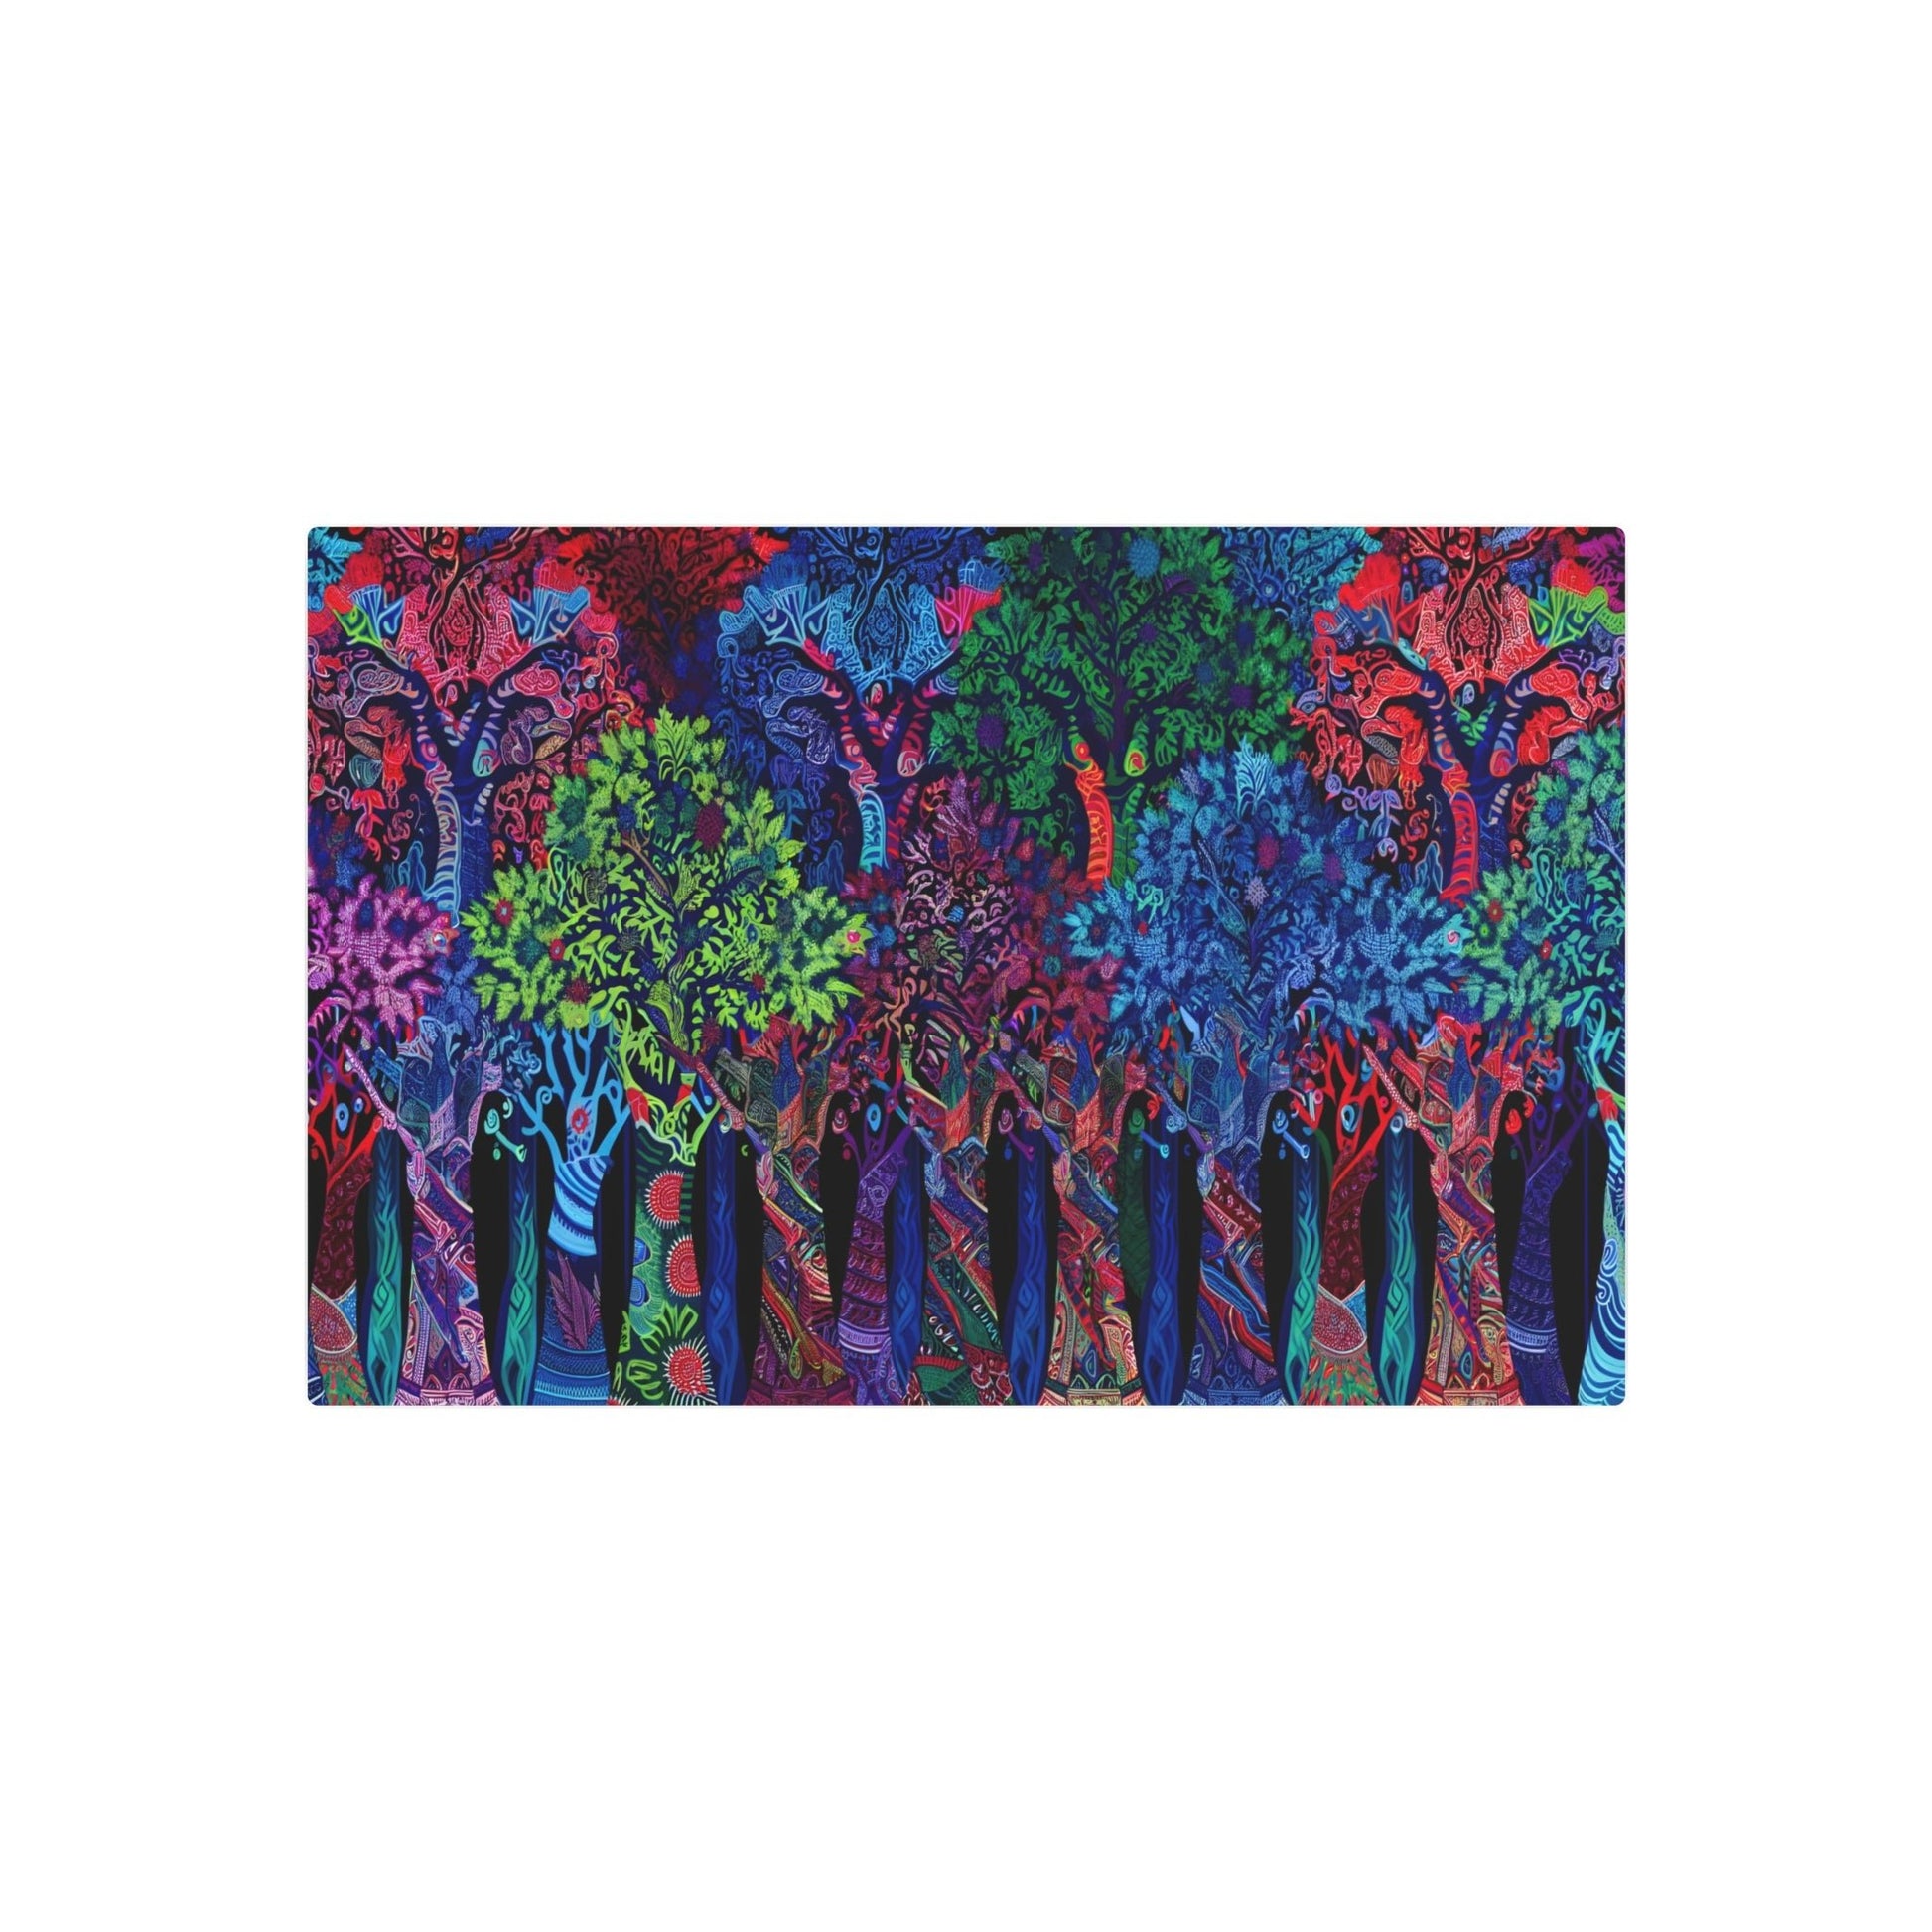 Metal Poster Art | "Indonesian Batik Art: Vibrant and Intricate Forest Scene with Detailed Patterned Trees - Authentic Non-Western Global Style Artwork" - Metal Poster Art 30″ x 20″ (Horizontal) 0.12''